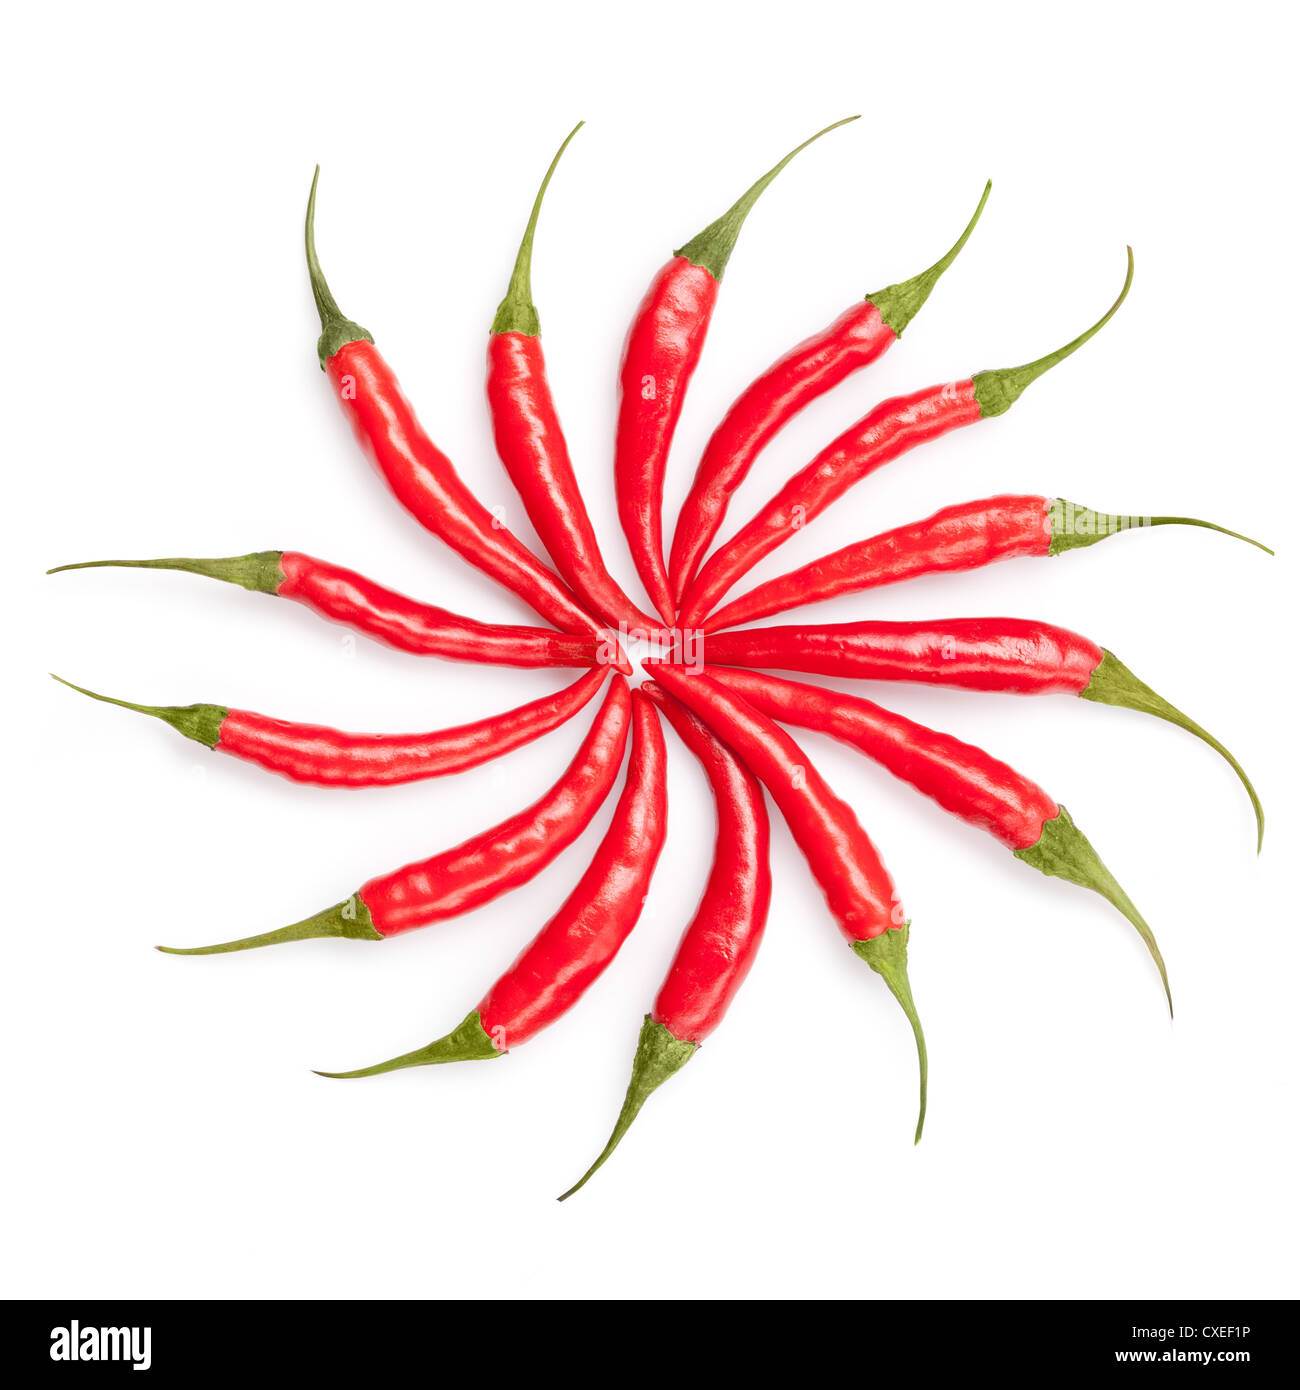 sun from chili peppers isolated on white Stock Photo